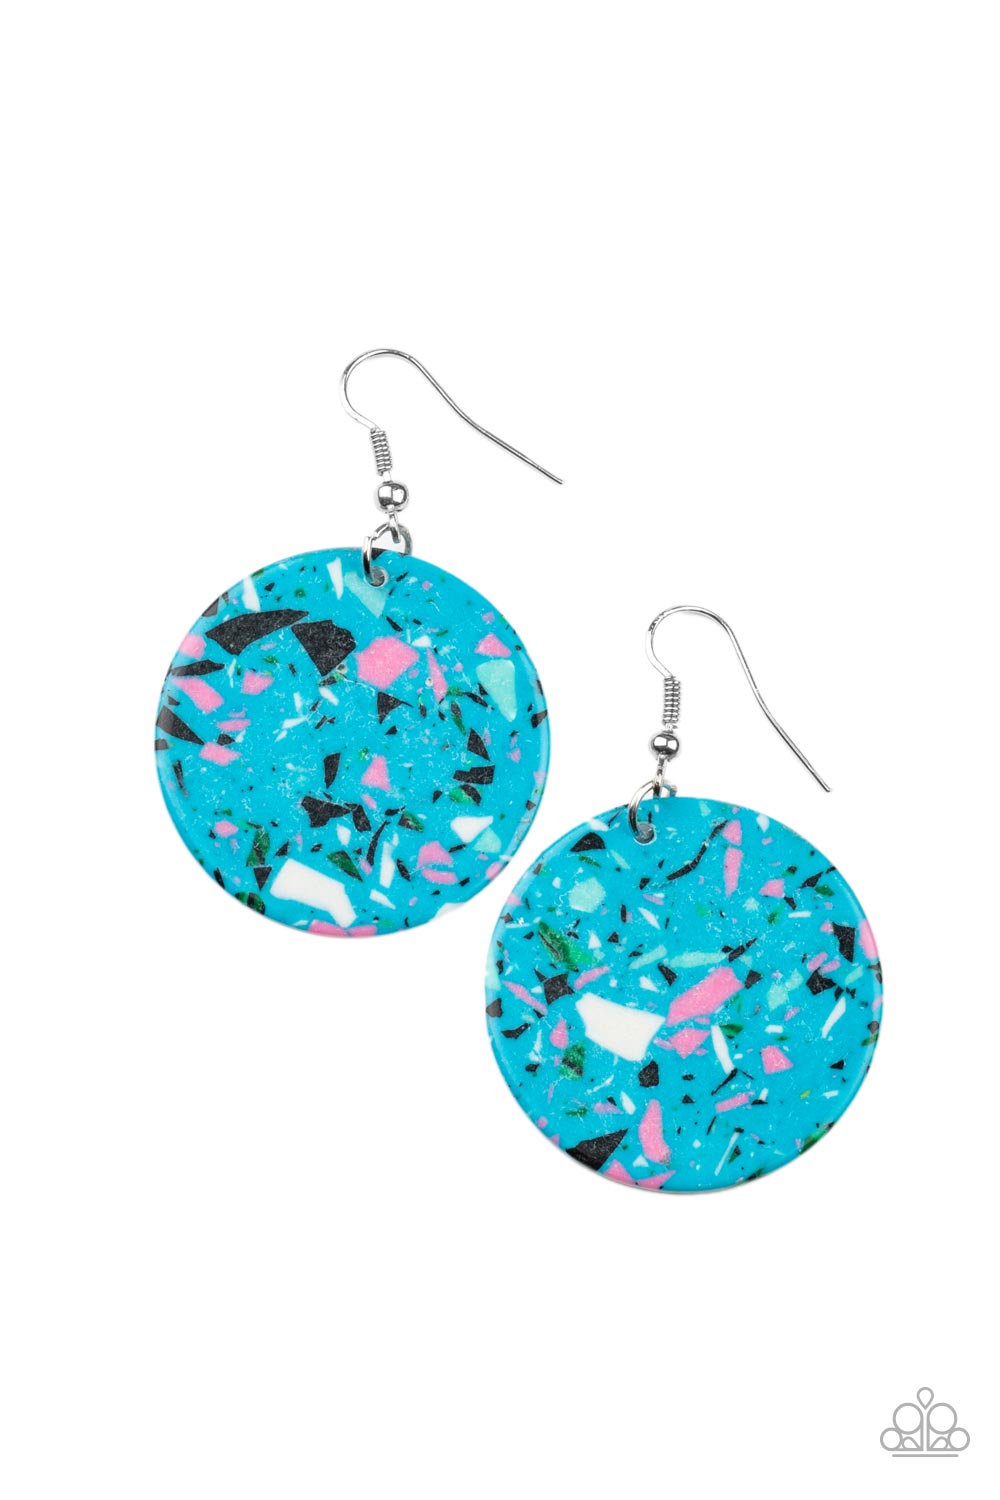 Featuring a colorful terrazzo finish, a faux blue stone disc swings from the ear for a modern look. Earring attaches to a standard fishhook fitting.